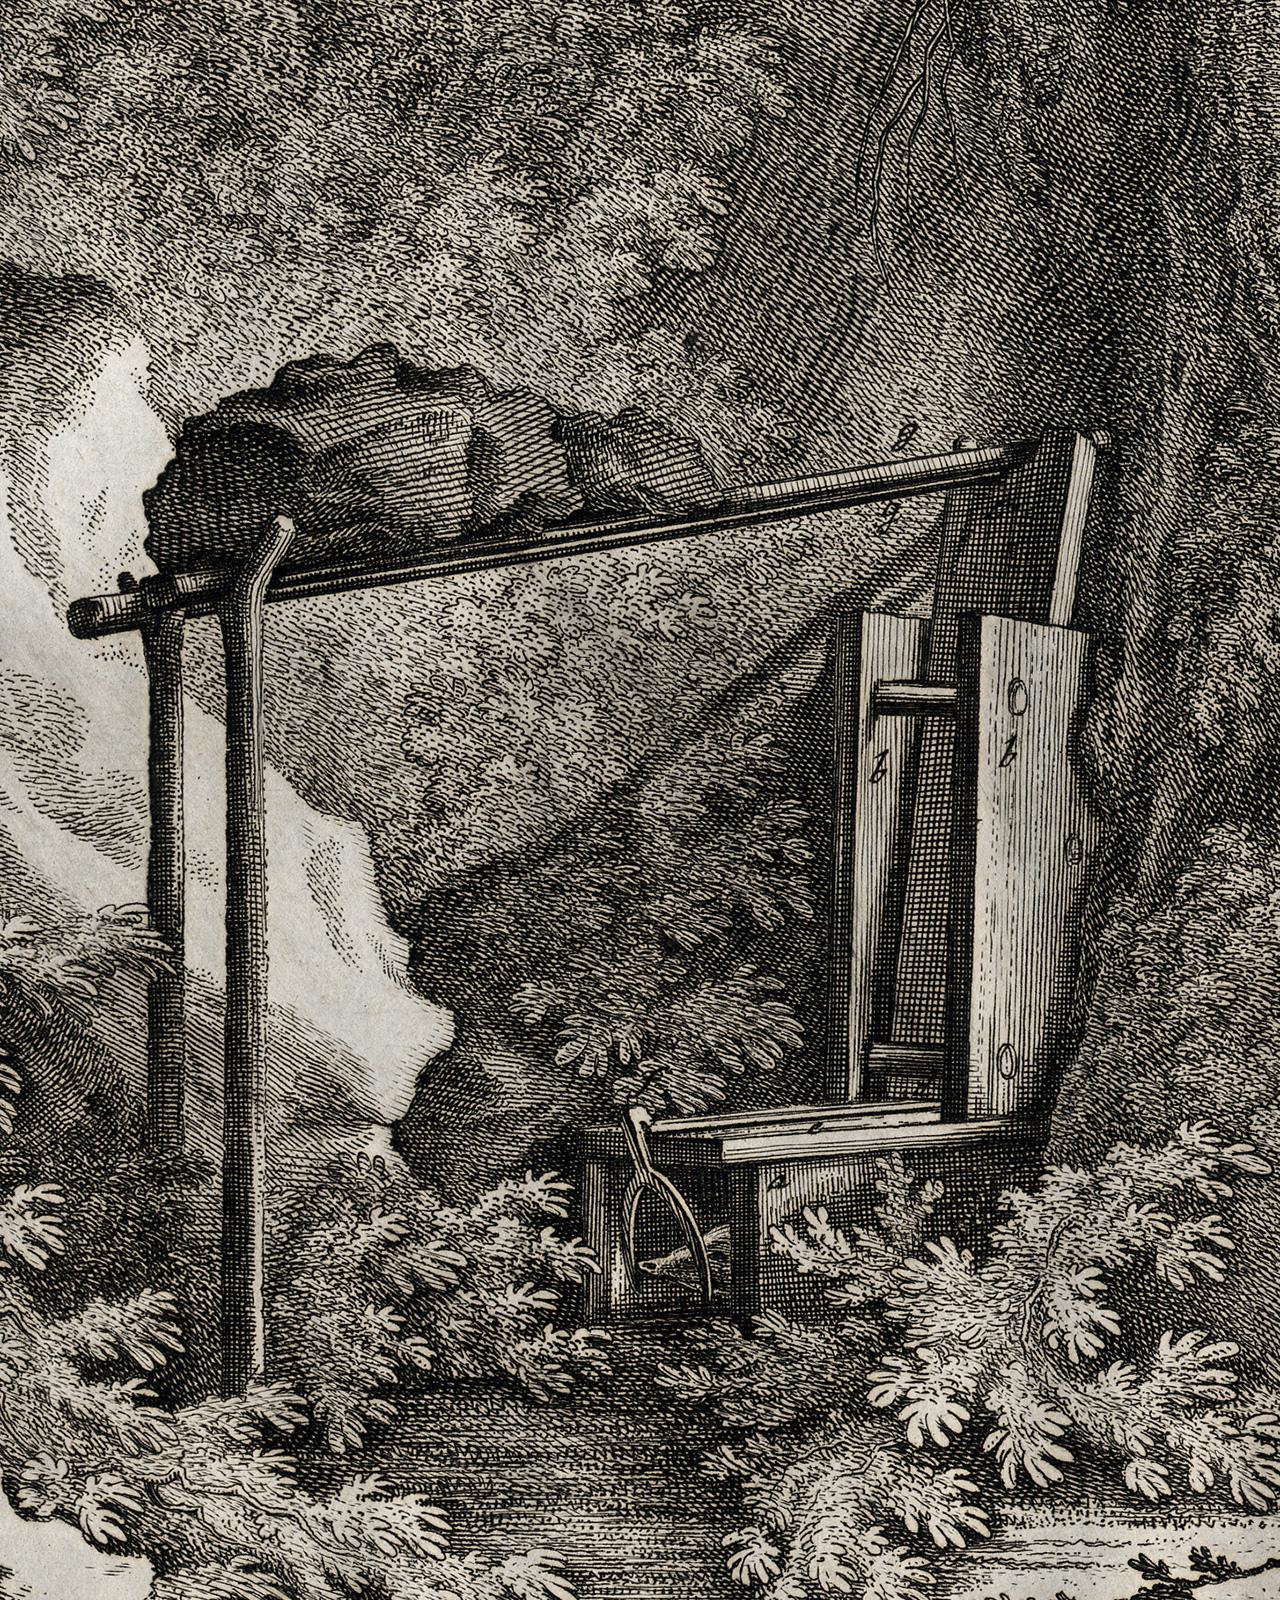 Hunting scene catching a badger in a trap by Ridinger - Engraving - 18th century - Old Masters Print by Martin Elias Ridinger